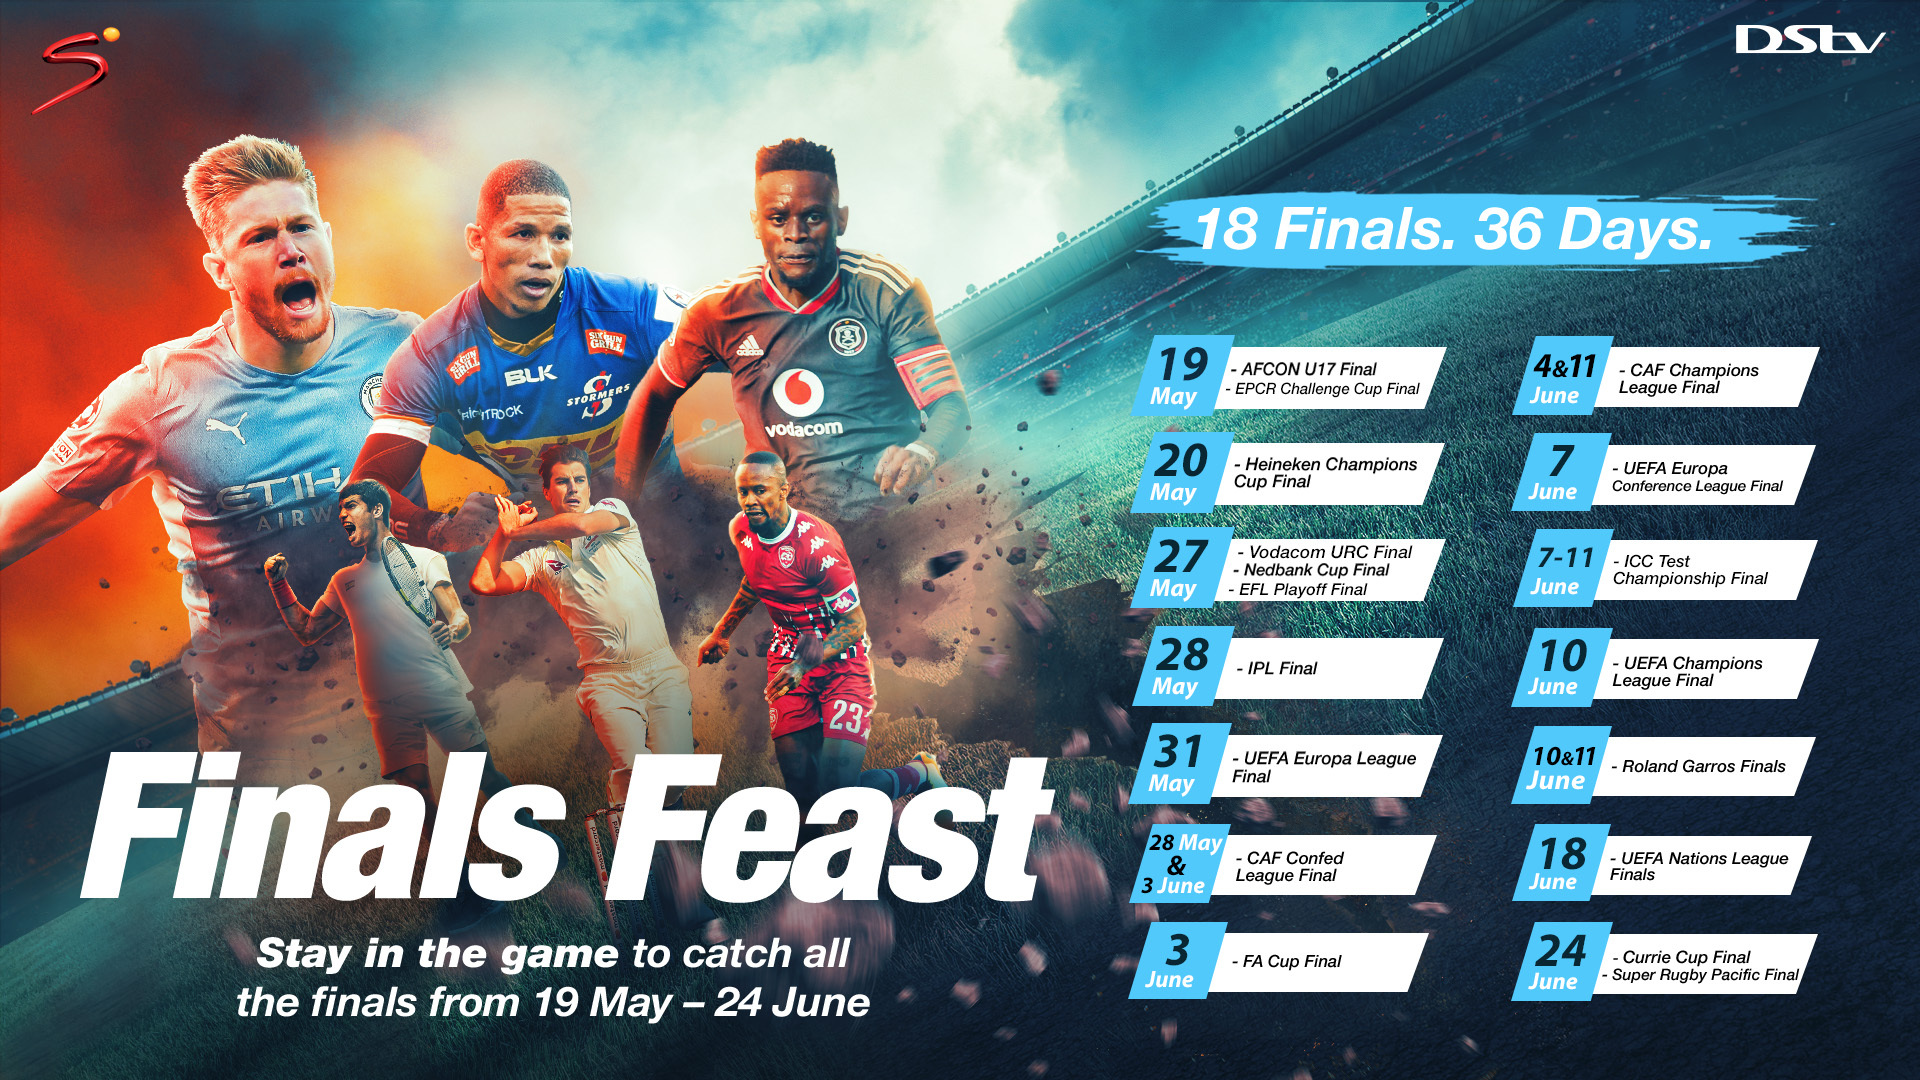 Stay in the game as finals feast beckons on SuperSport